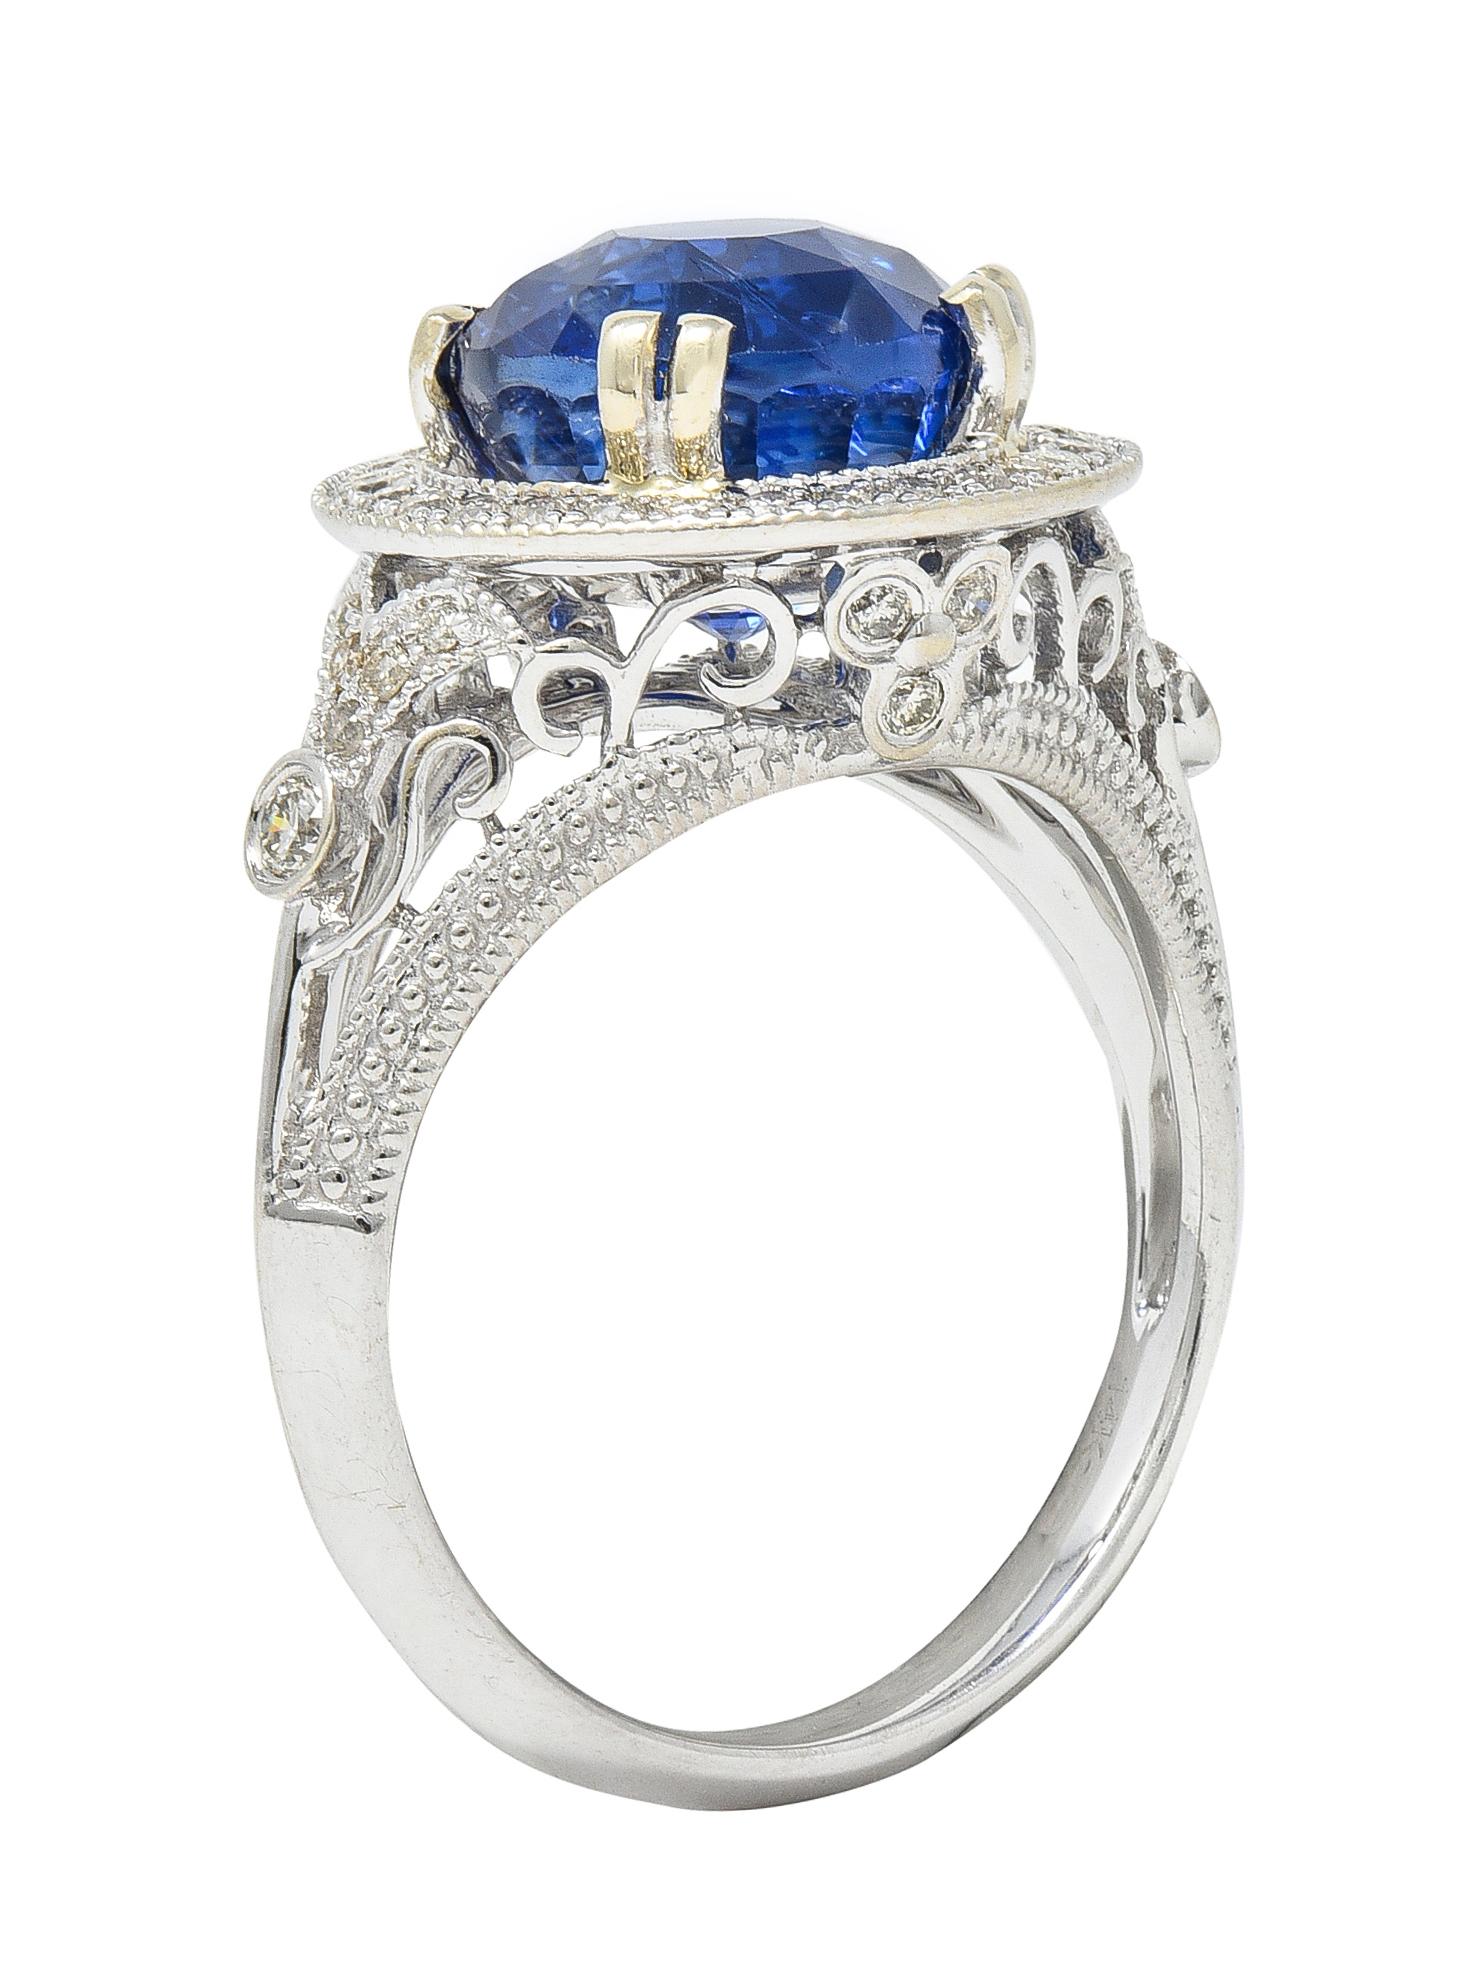 Centering a round cut sapphire weighing 4.48 carats - transparent medium blue in color 
Prong set with a recessed halo surrounded by round brilliant cut diamonds
With additional diamonds in pierced scroll and floral motif surround
Weighing